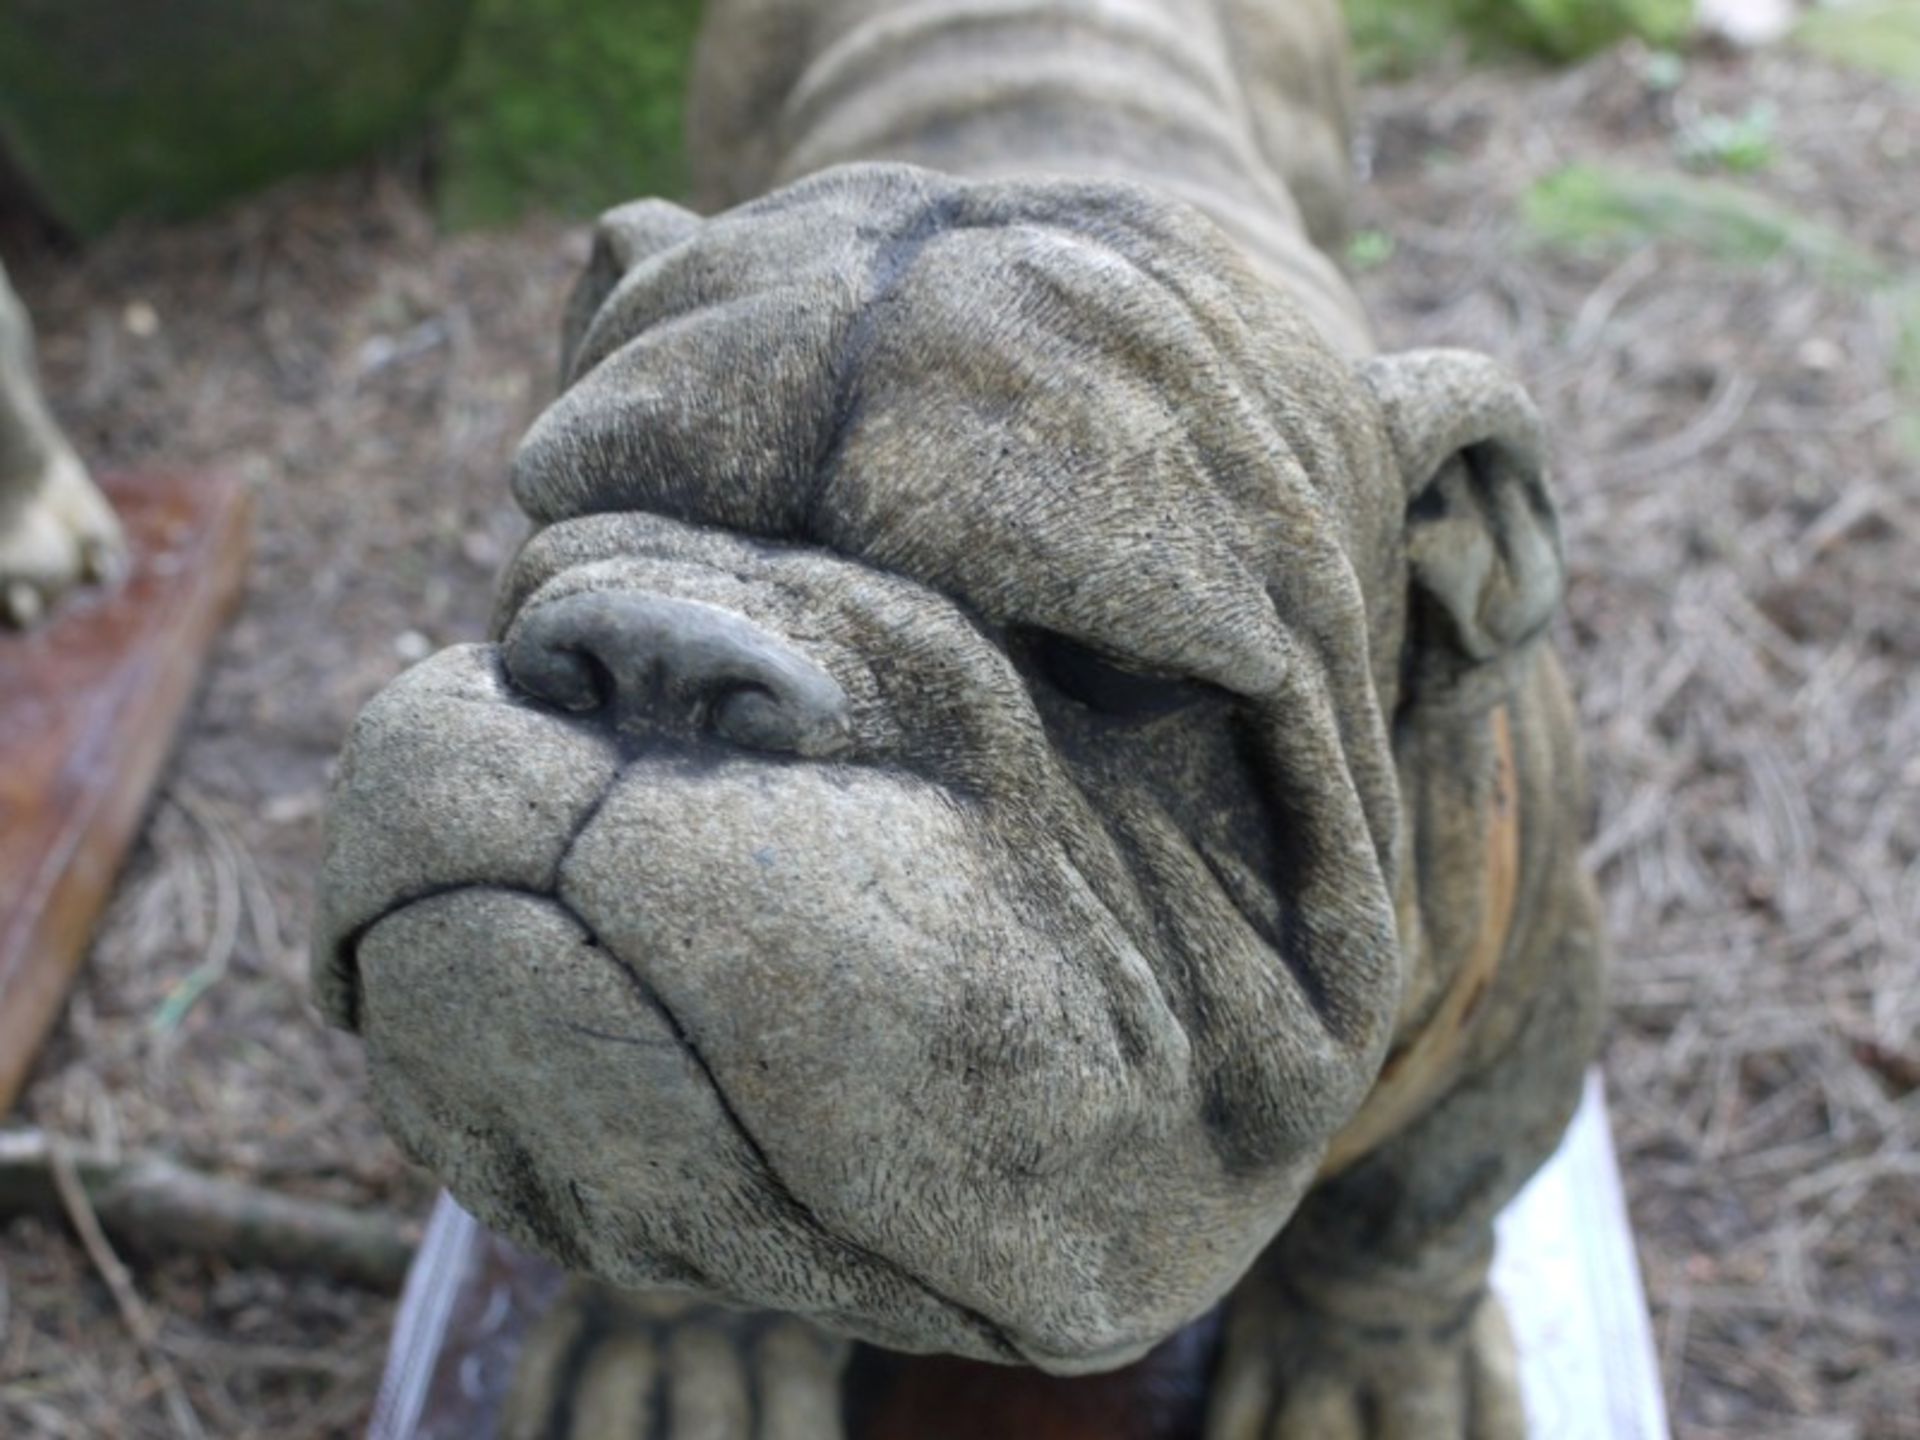 PAIR OF BULLDOGS   DIMENSIONS: Length: 65 cm Width: 33 cm Height: 40 cm   COLLECTION / VIEWING - Image 4 of 6